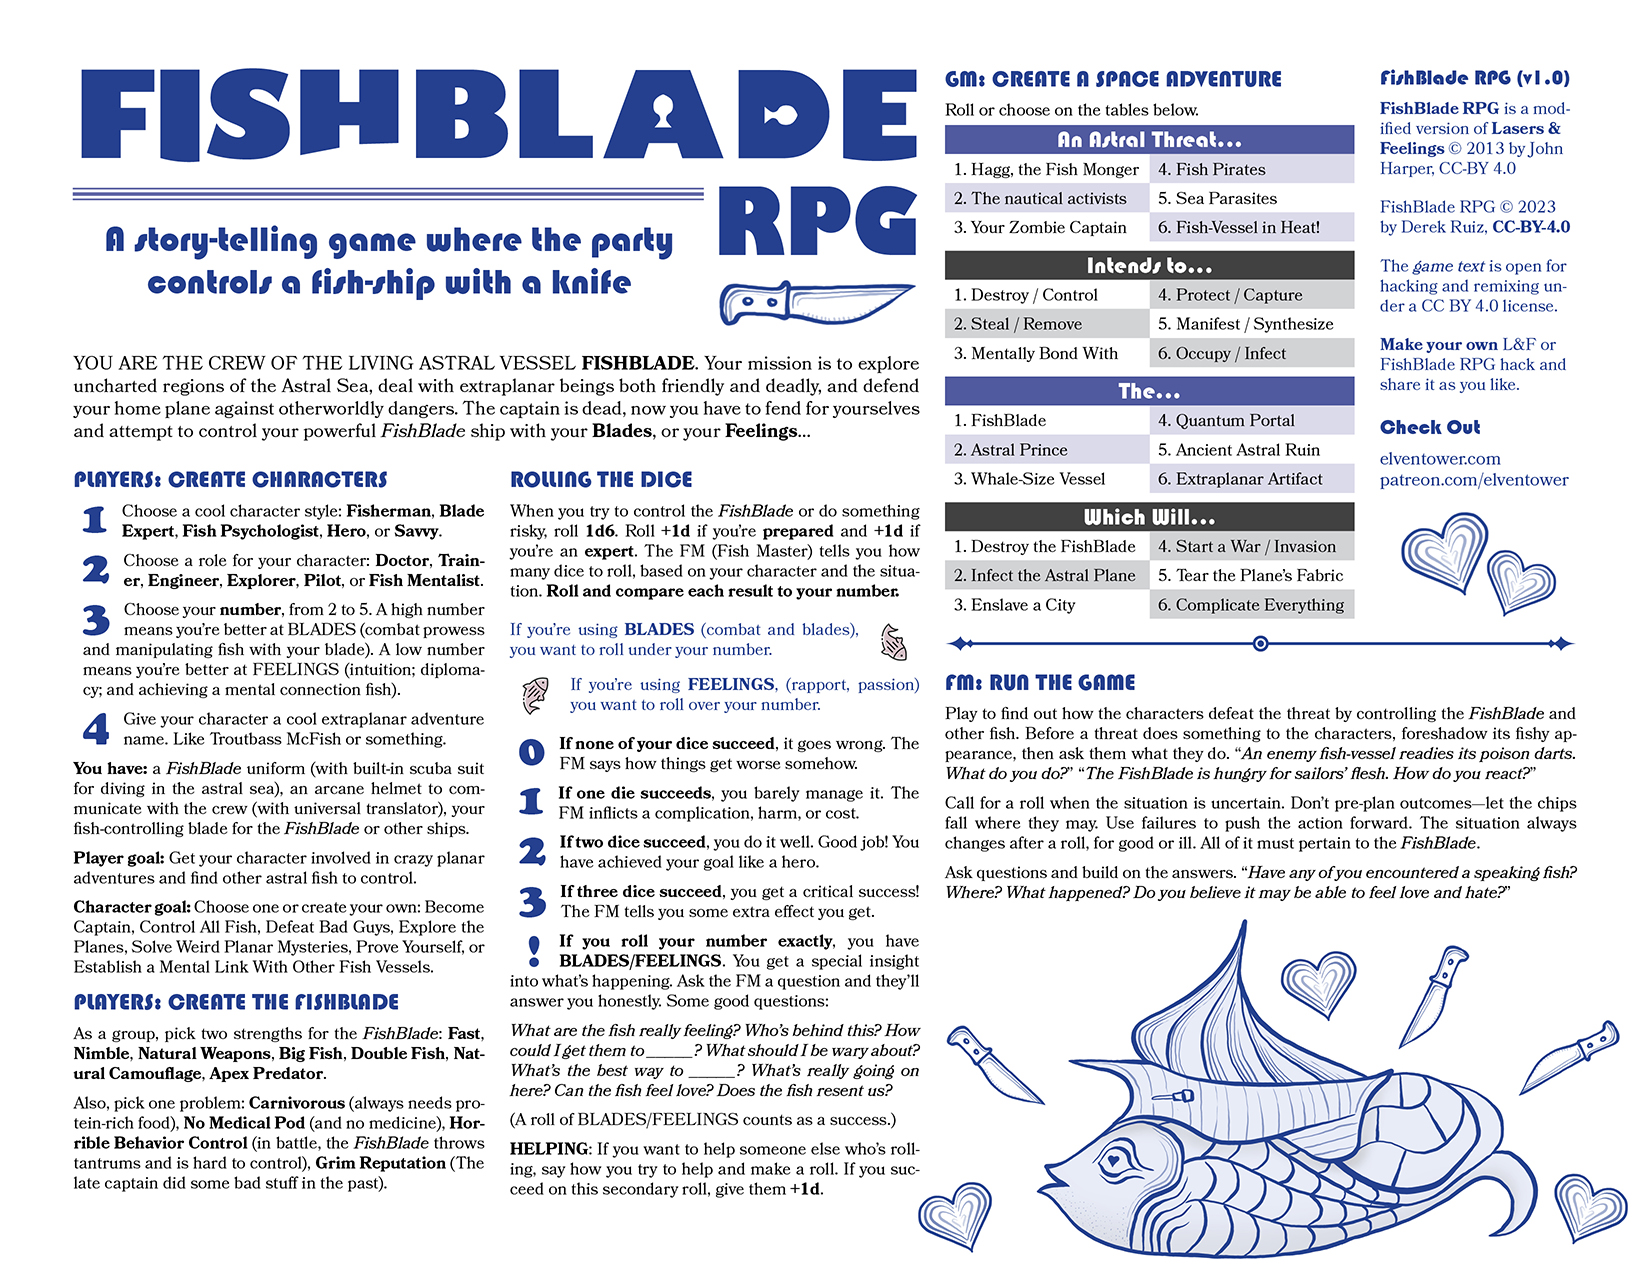 FishBlade preview